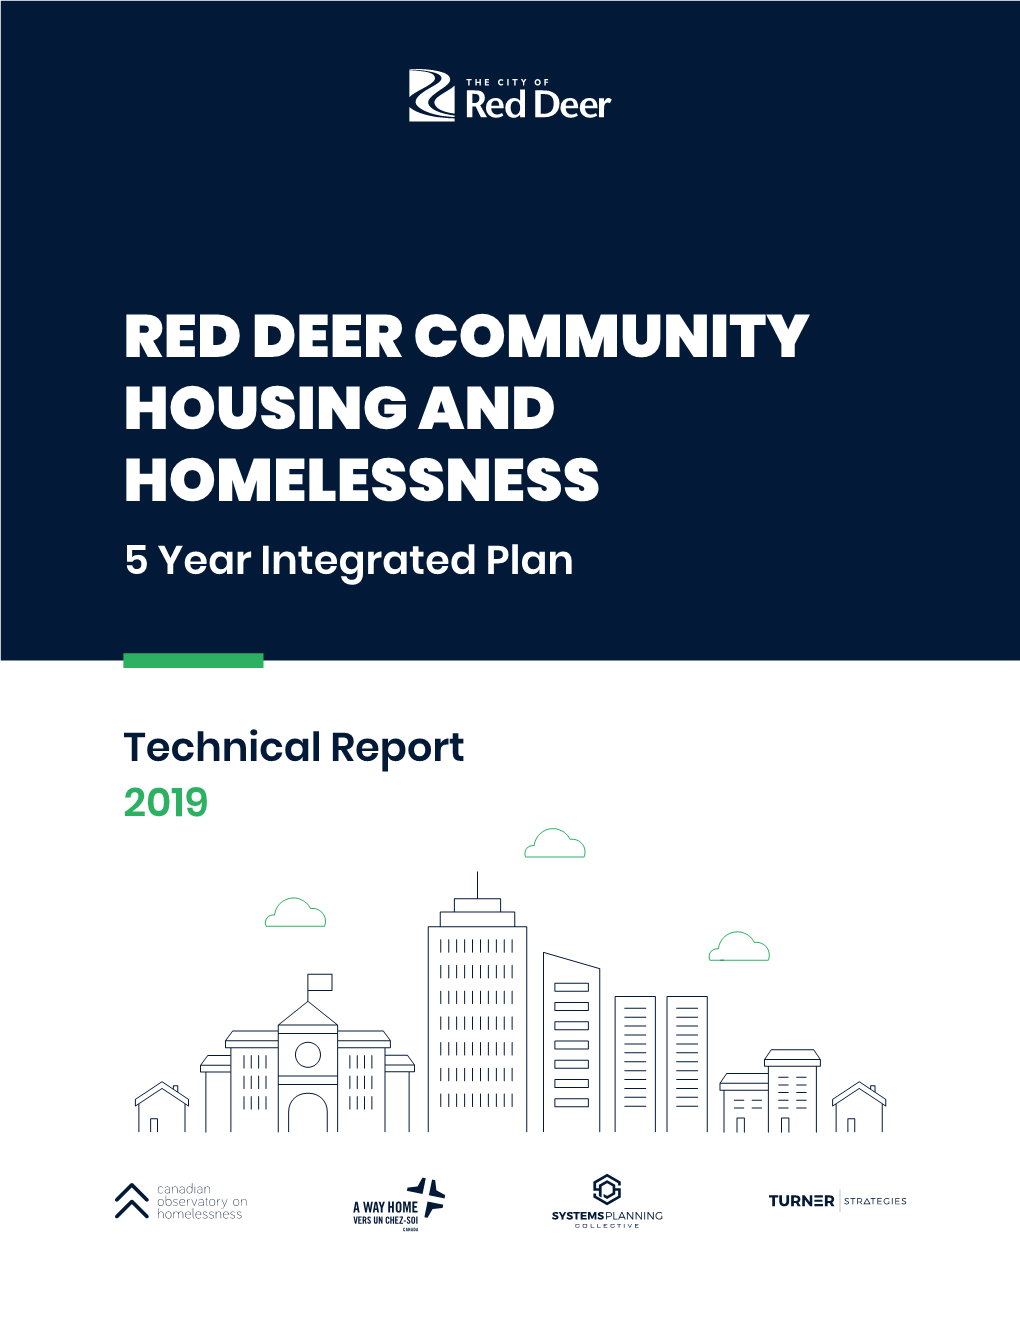 RED DEER COMMUNITY HOUSING and HOMELESSNESS 5 Year Integrated Plan